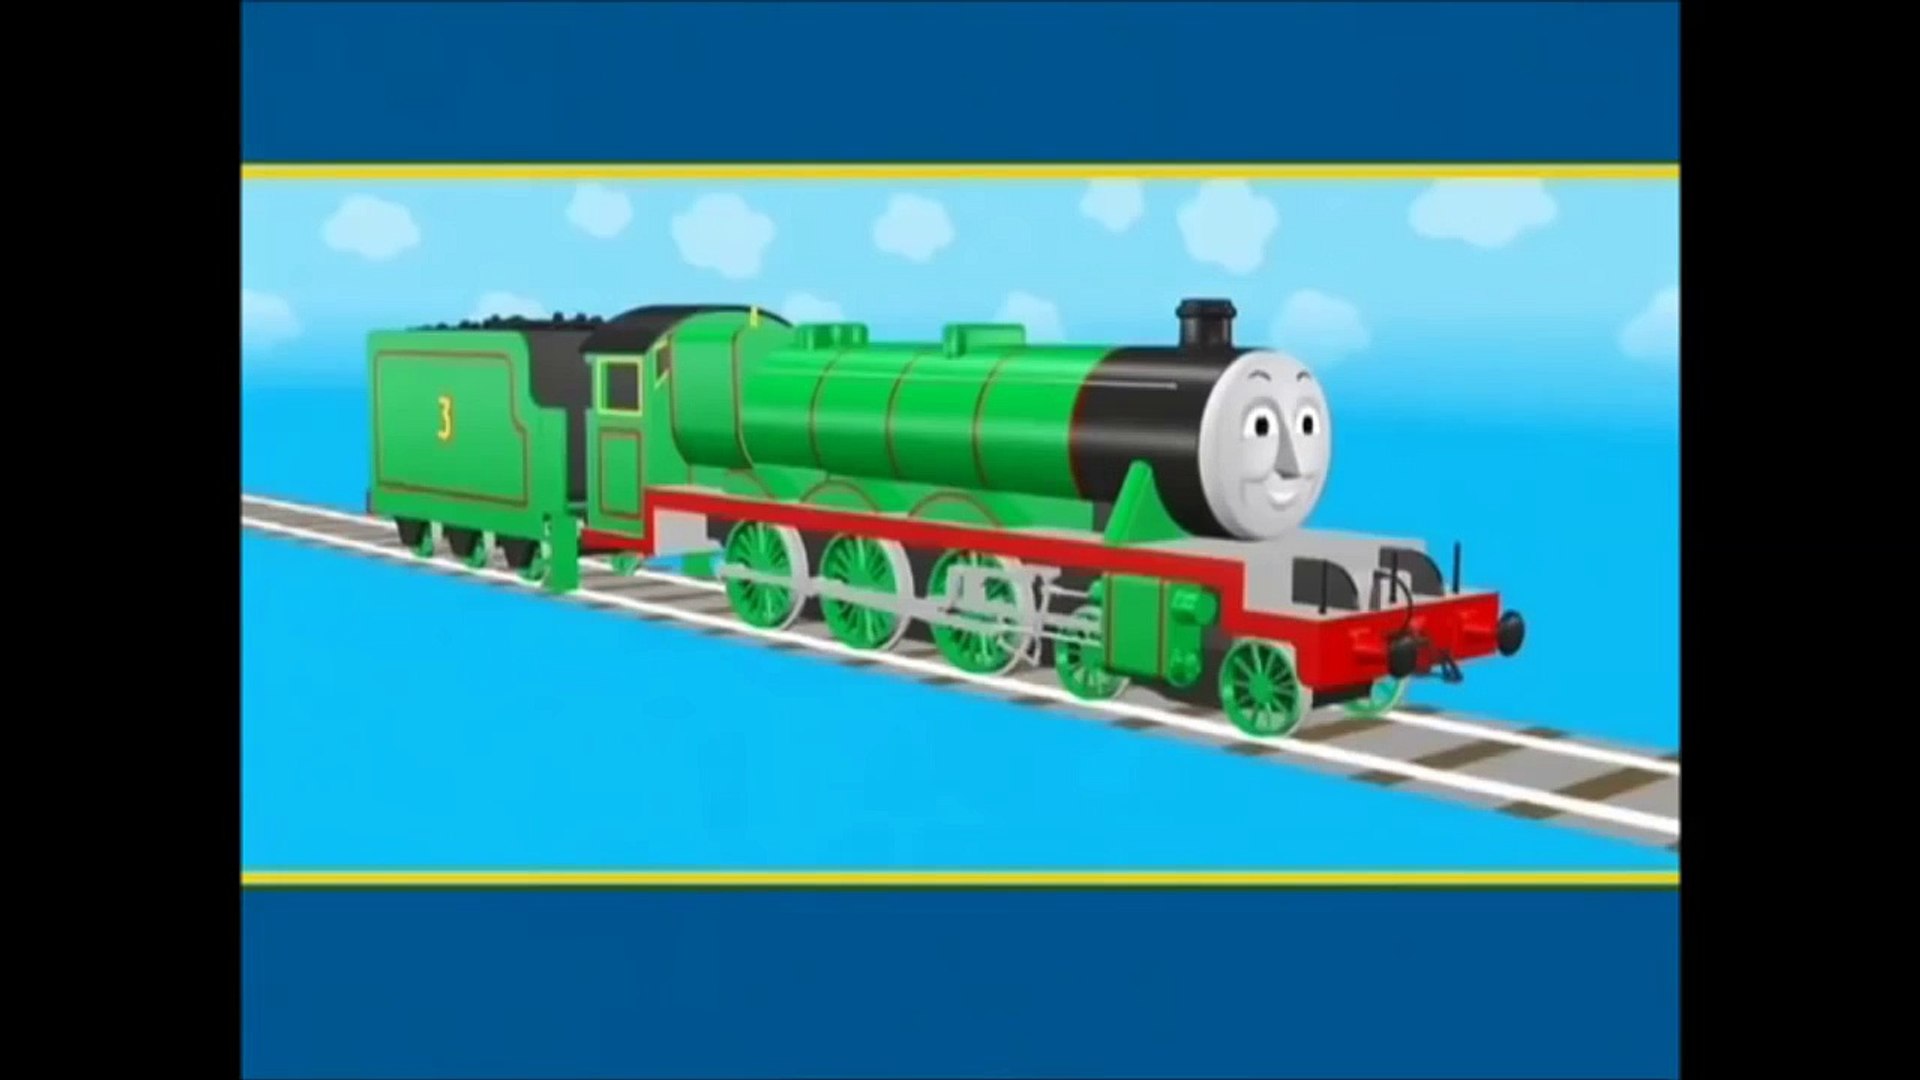 Thomas & Friends UK: What Is Henry Thinking? - Dailymotion Video